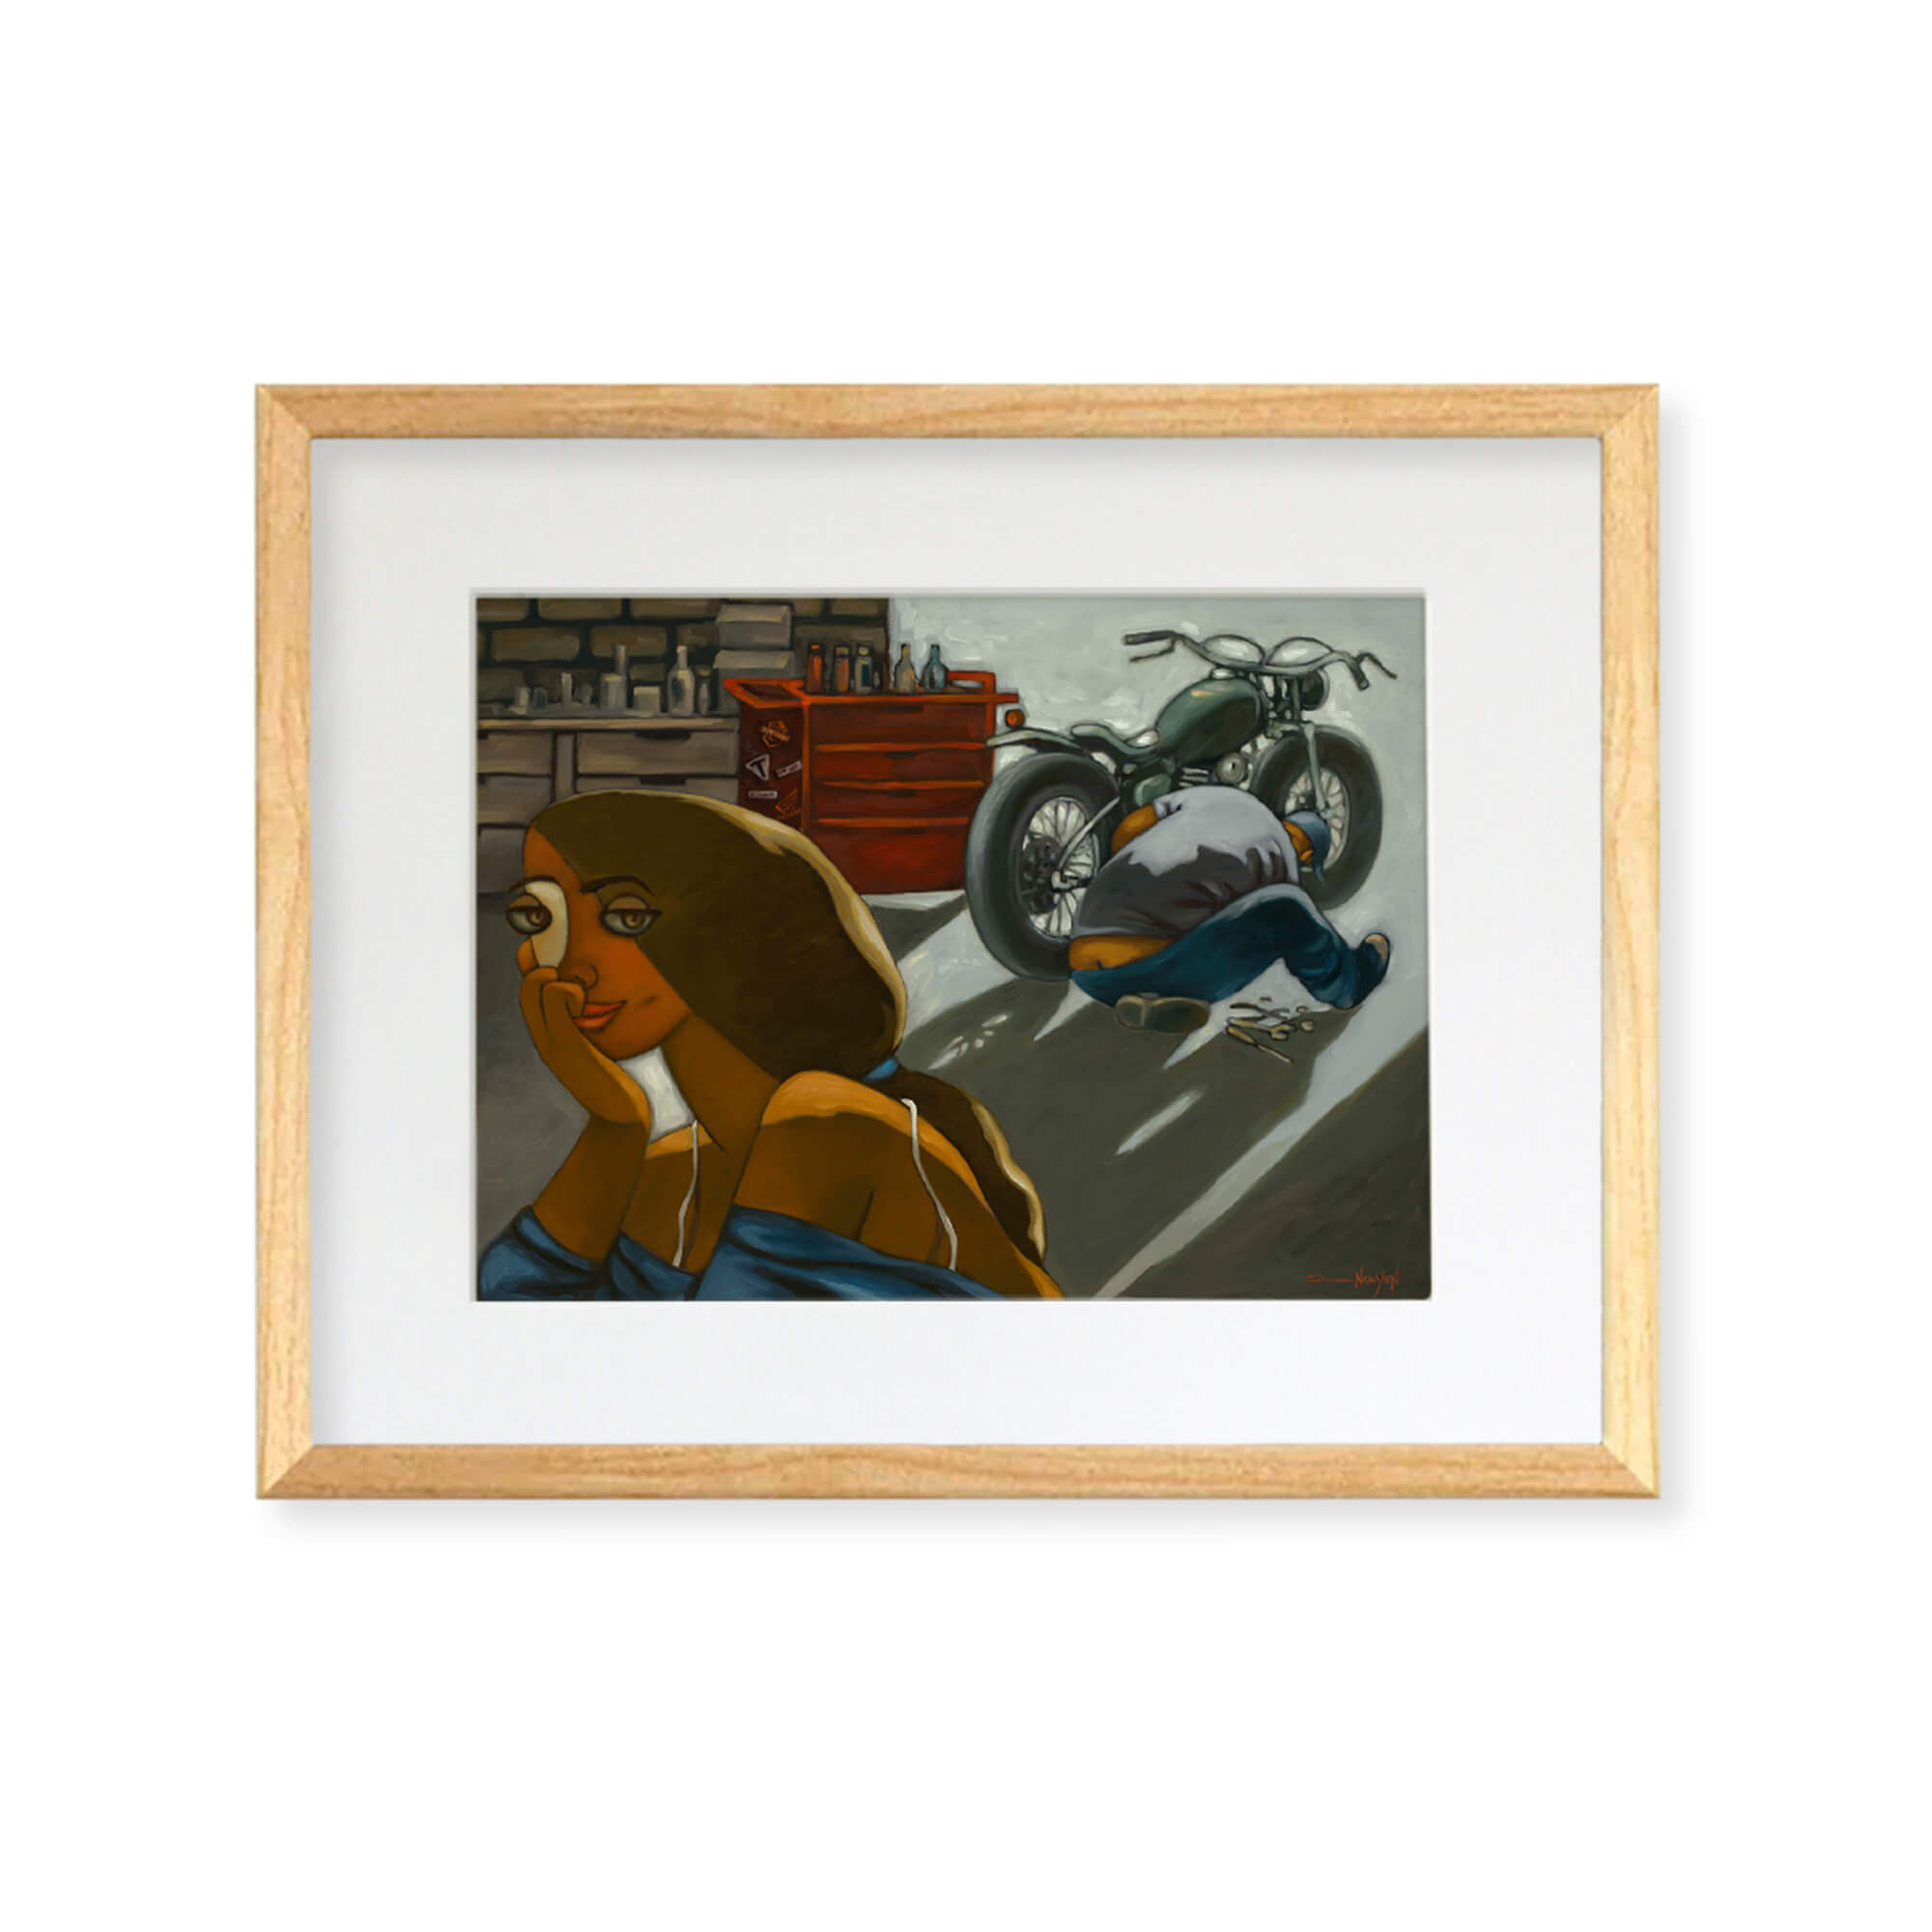 Framed matted print of a woman having her vintage motorcycle fixed in a mechanic shop by Hawaii artist Tim Nguyen